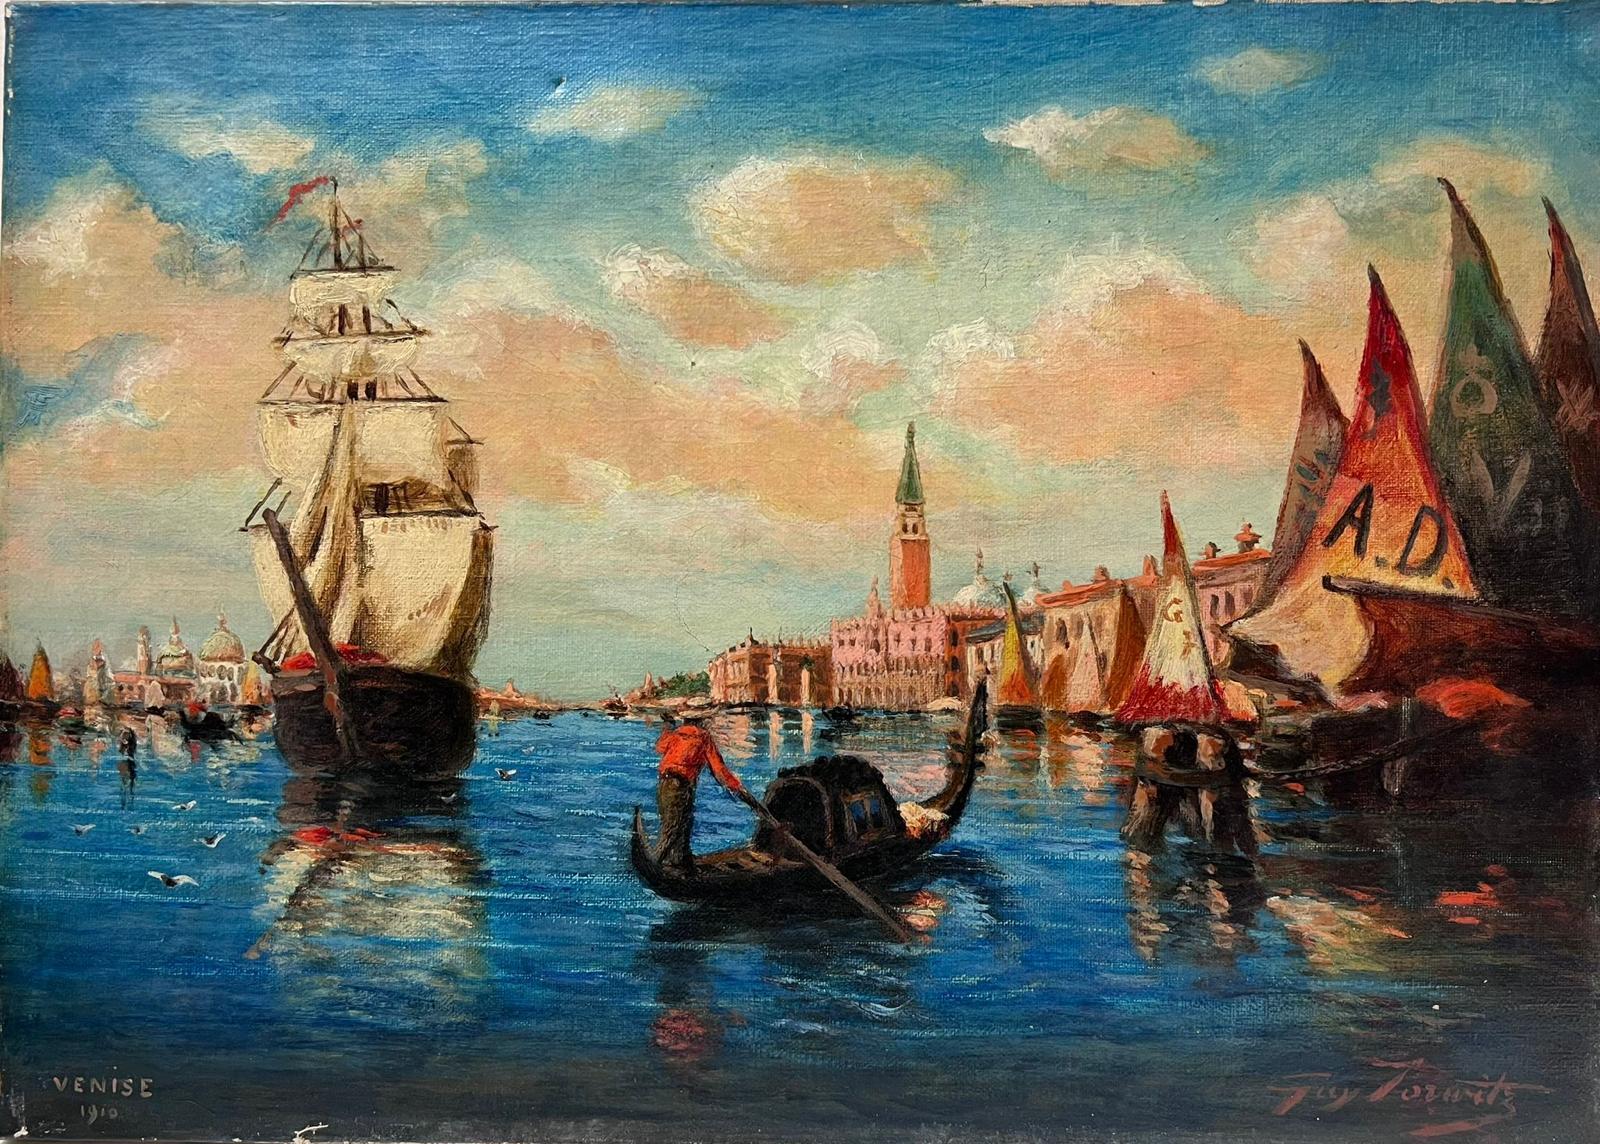 Italian antique Landscape Painting - The Grand Canal Venice Antique 1910 Signed Oil Painting on Canvas Many Boats